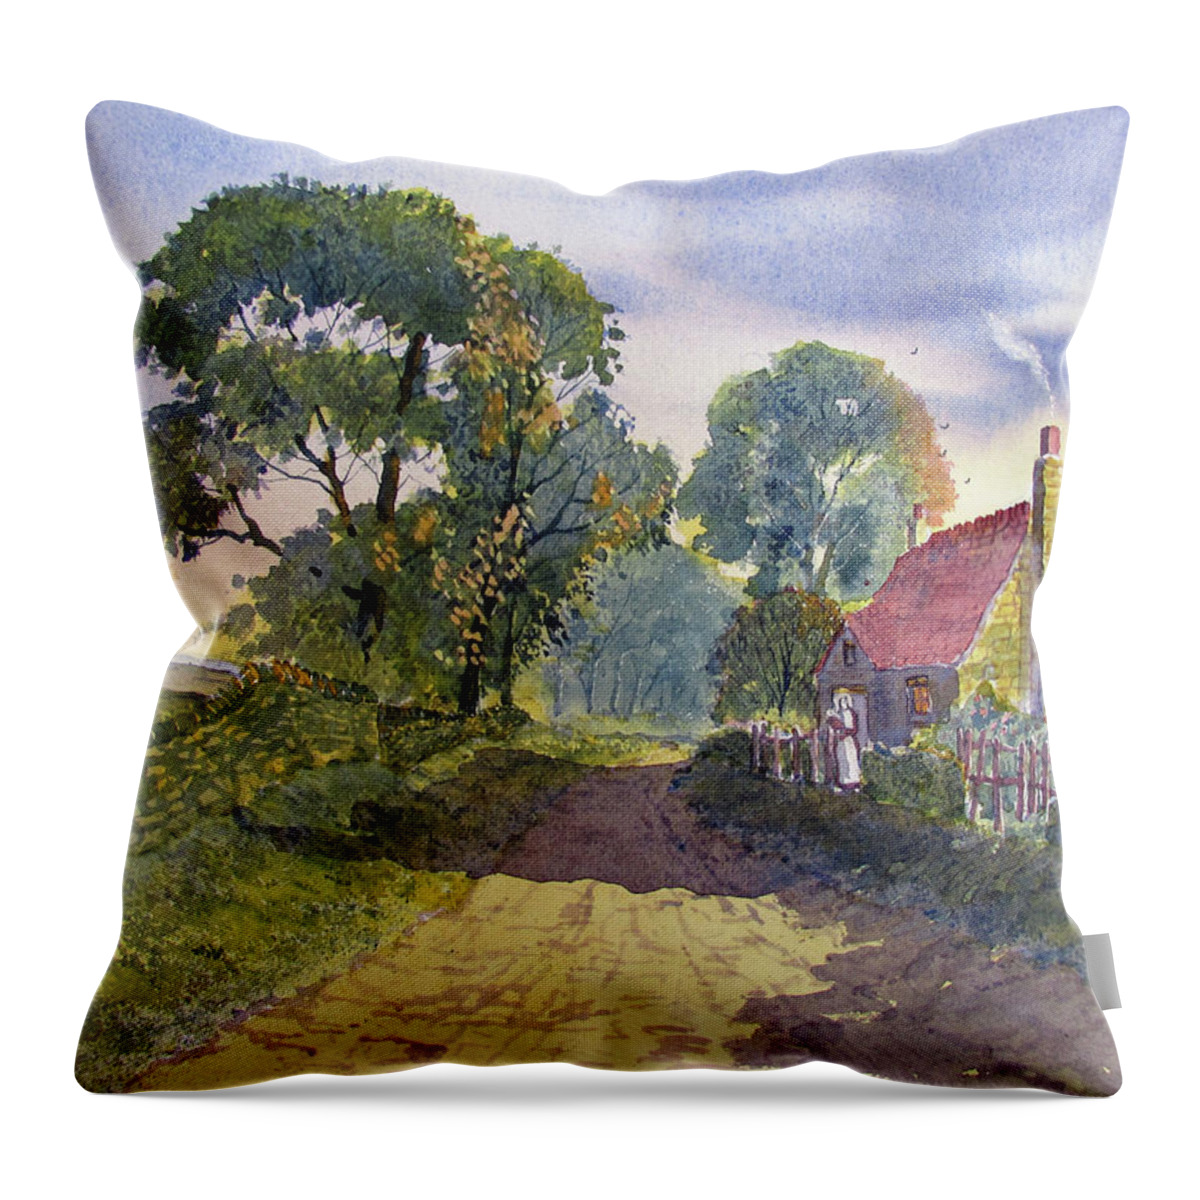 Watercolour Throw Pillow featuring the painting Standing in the Shadows by Glenn Marshall